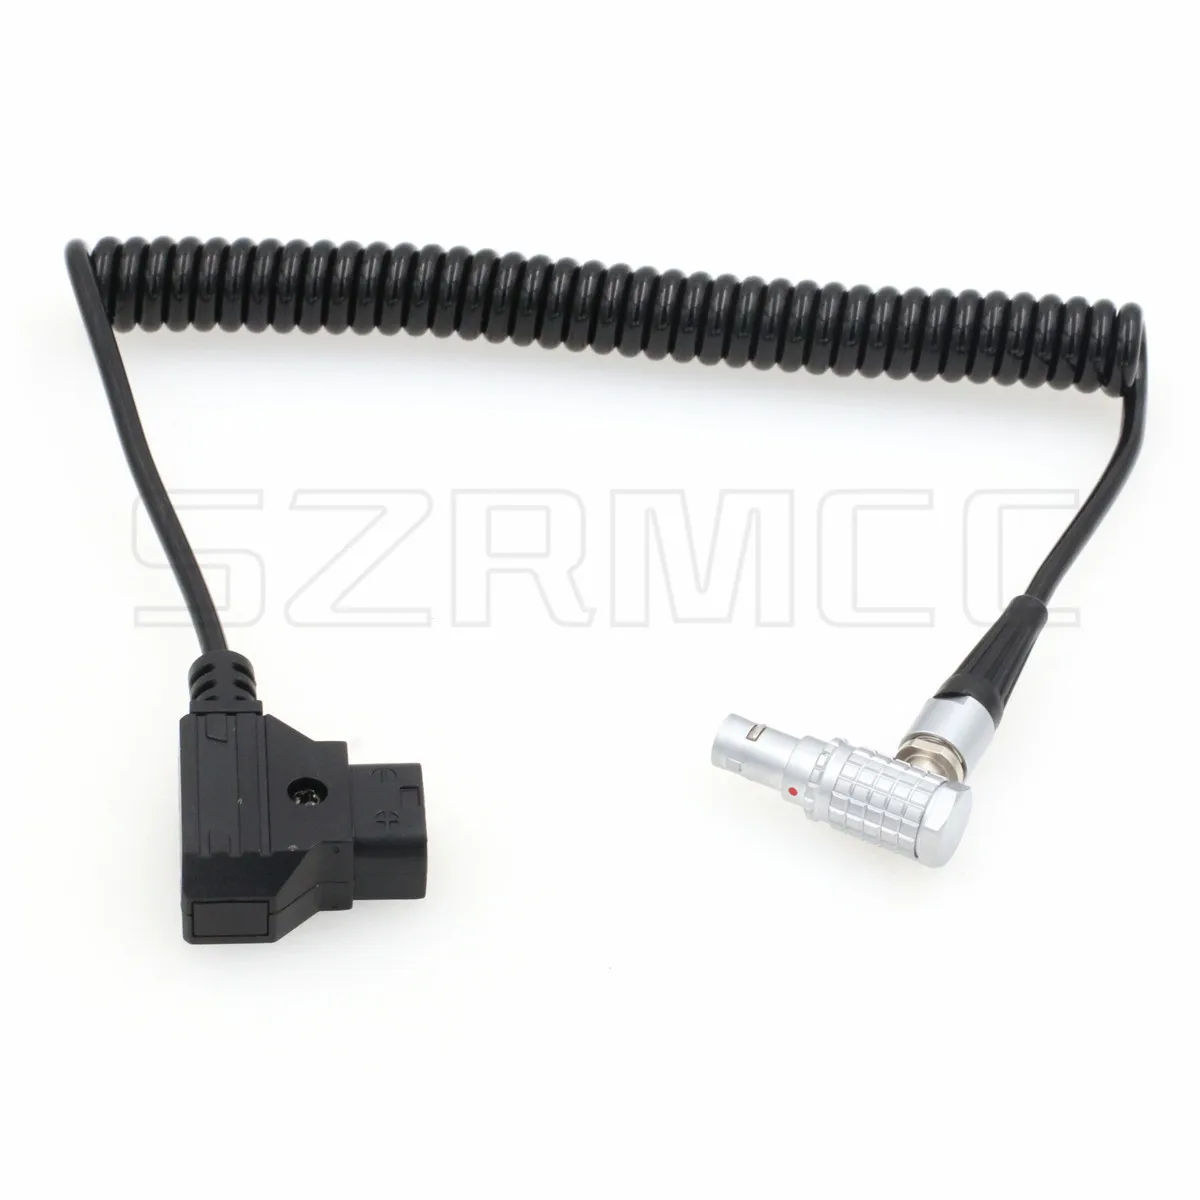 

D-tap 2 Pin Male to 0B 6 Pin Coiled Power Cable for DJI Wireless Follow Focus Motor Unit